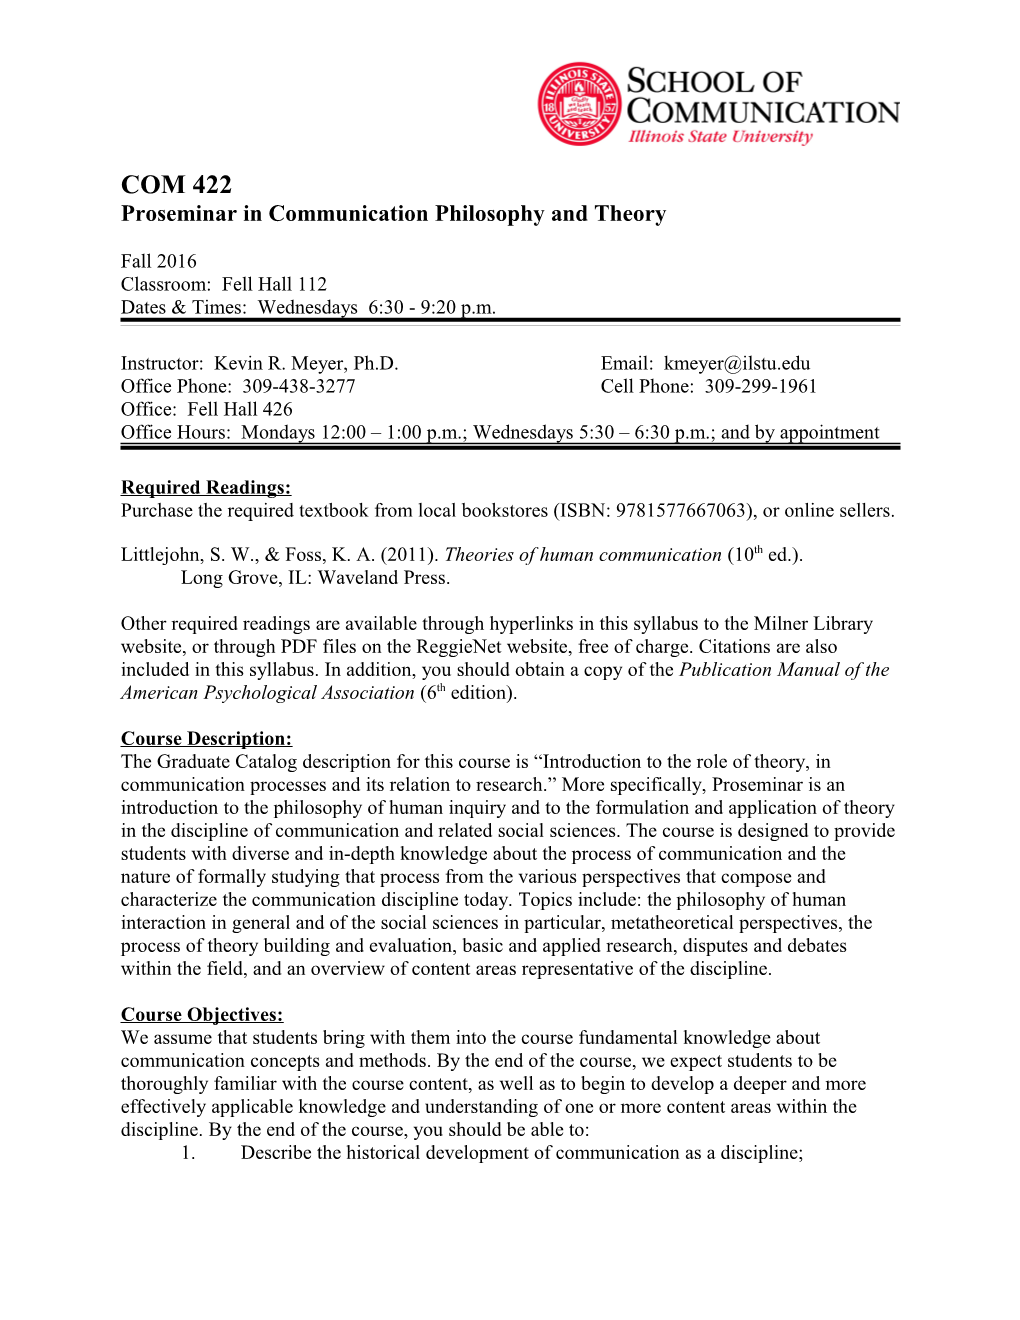 Proseminar in Communication Philosophy and Theory